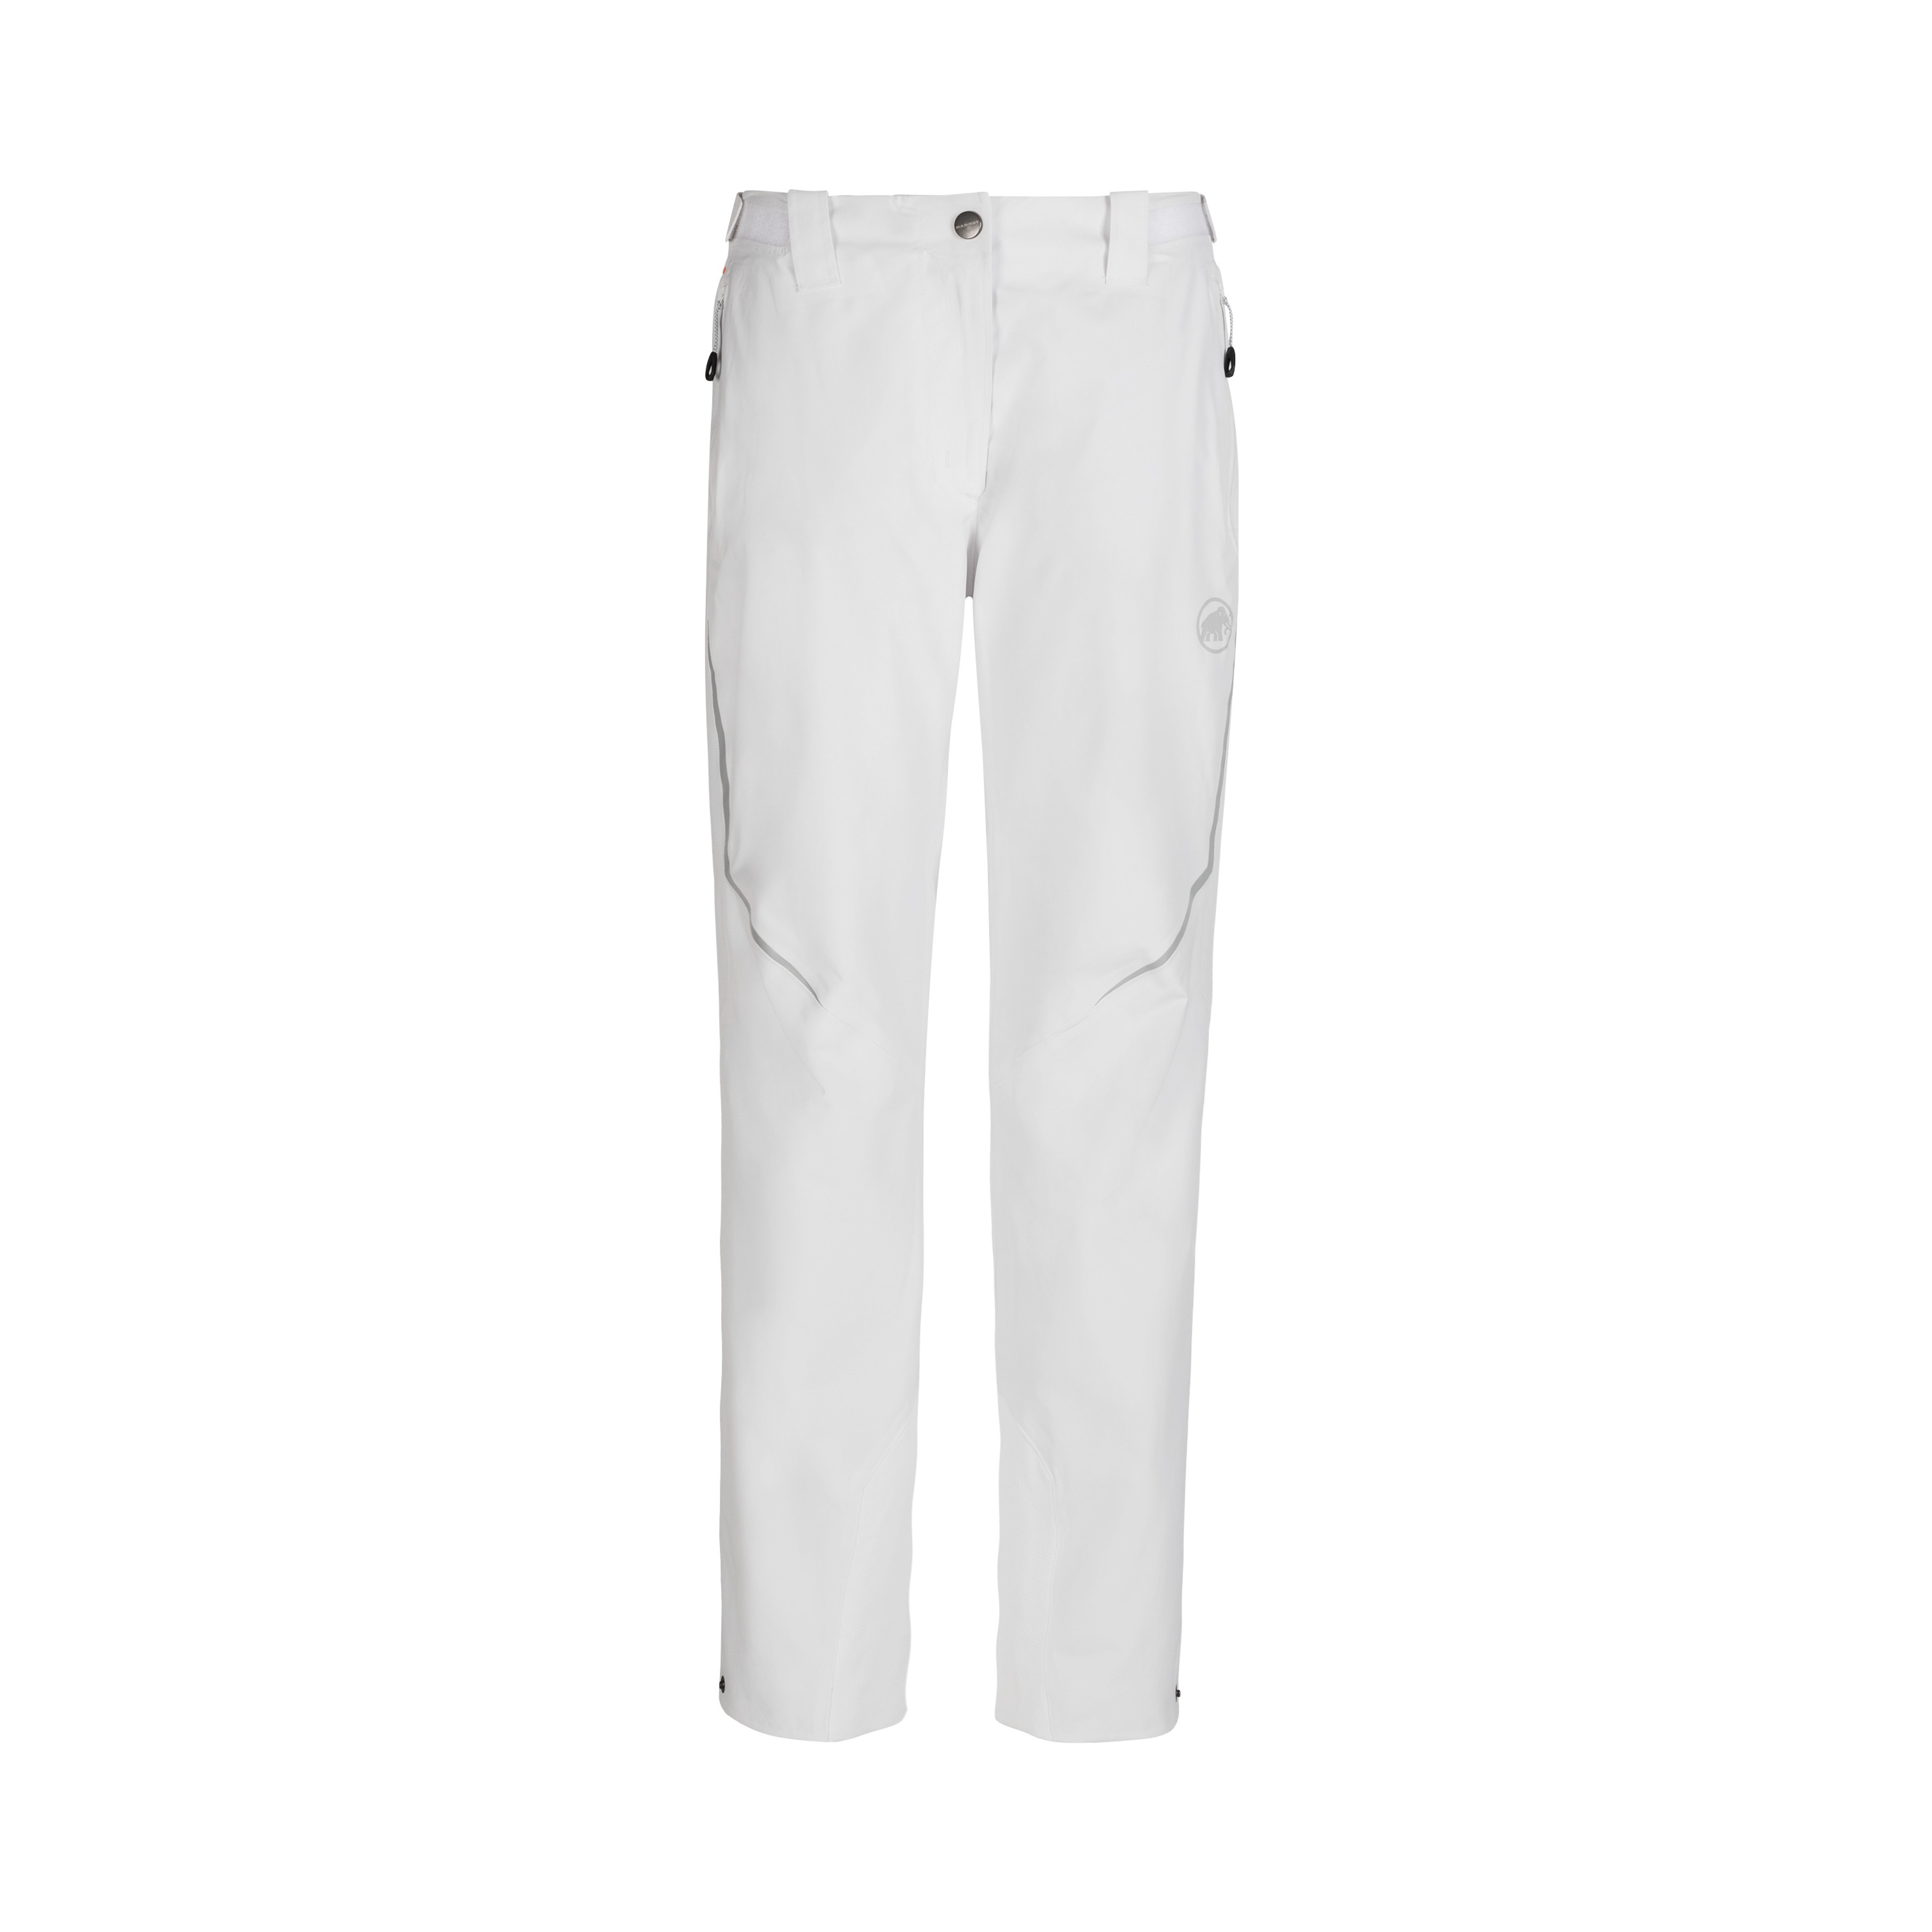 Matters HS Thermo Pants Women product image